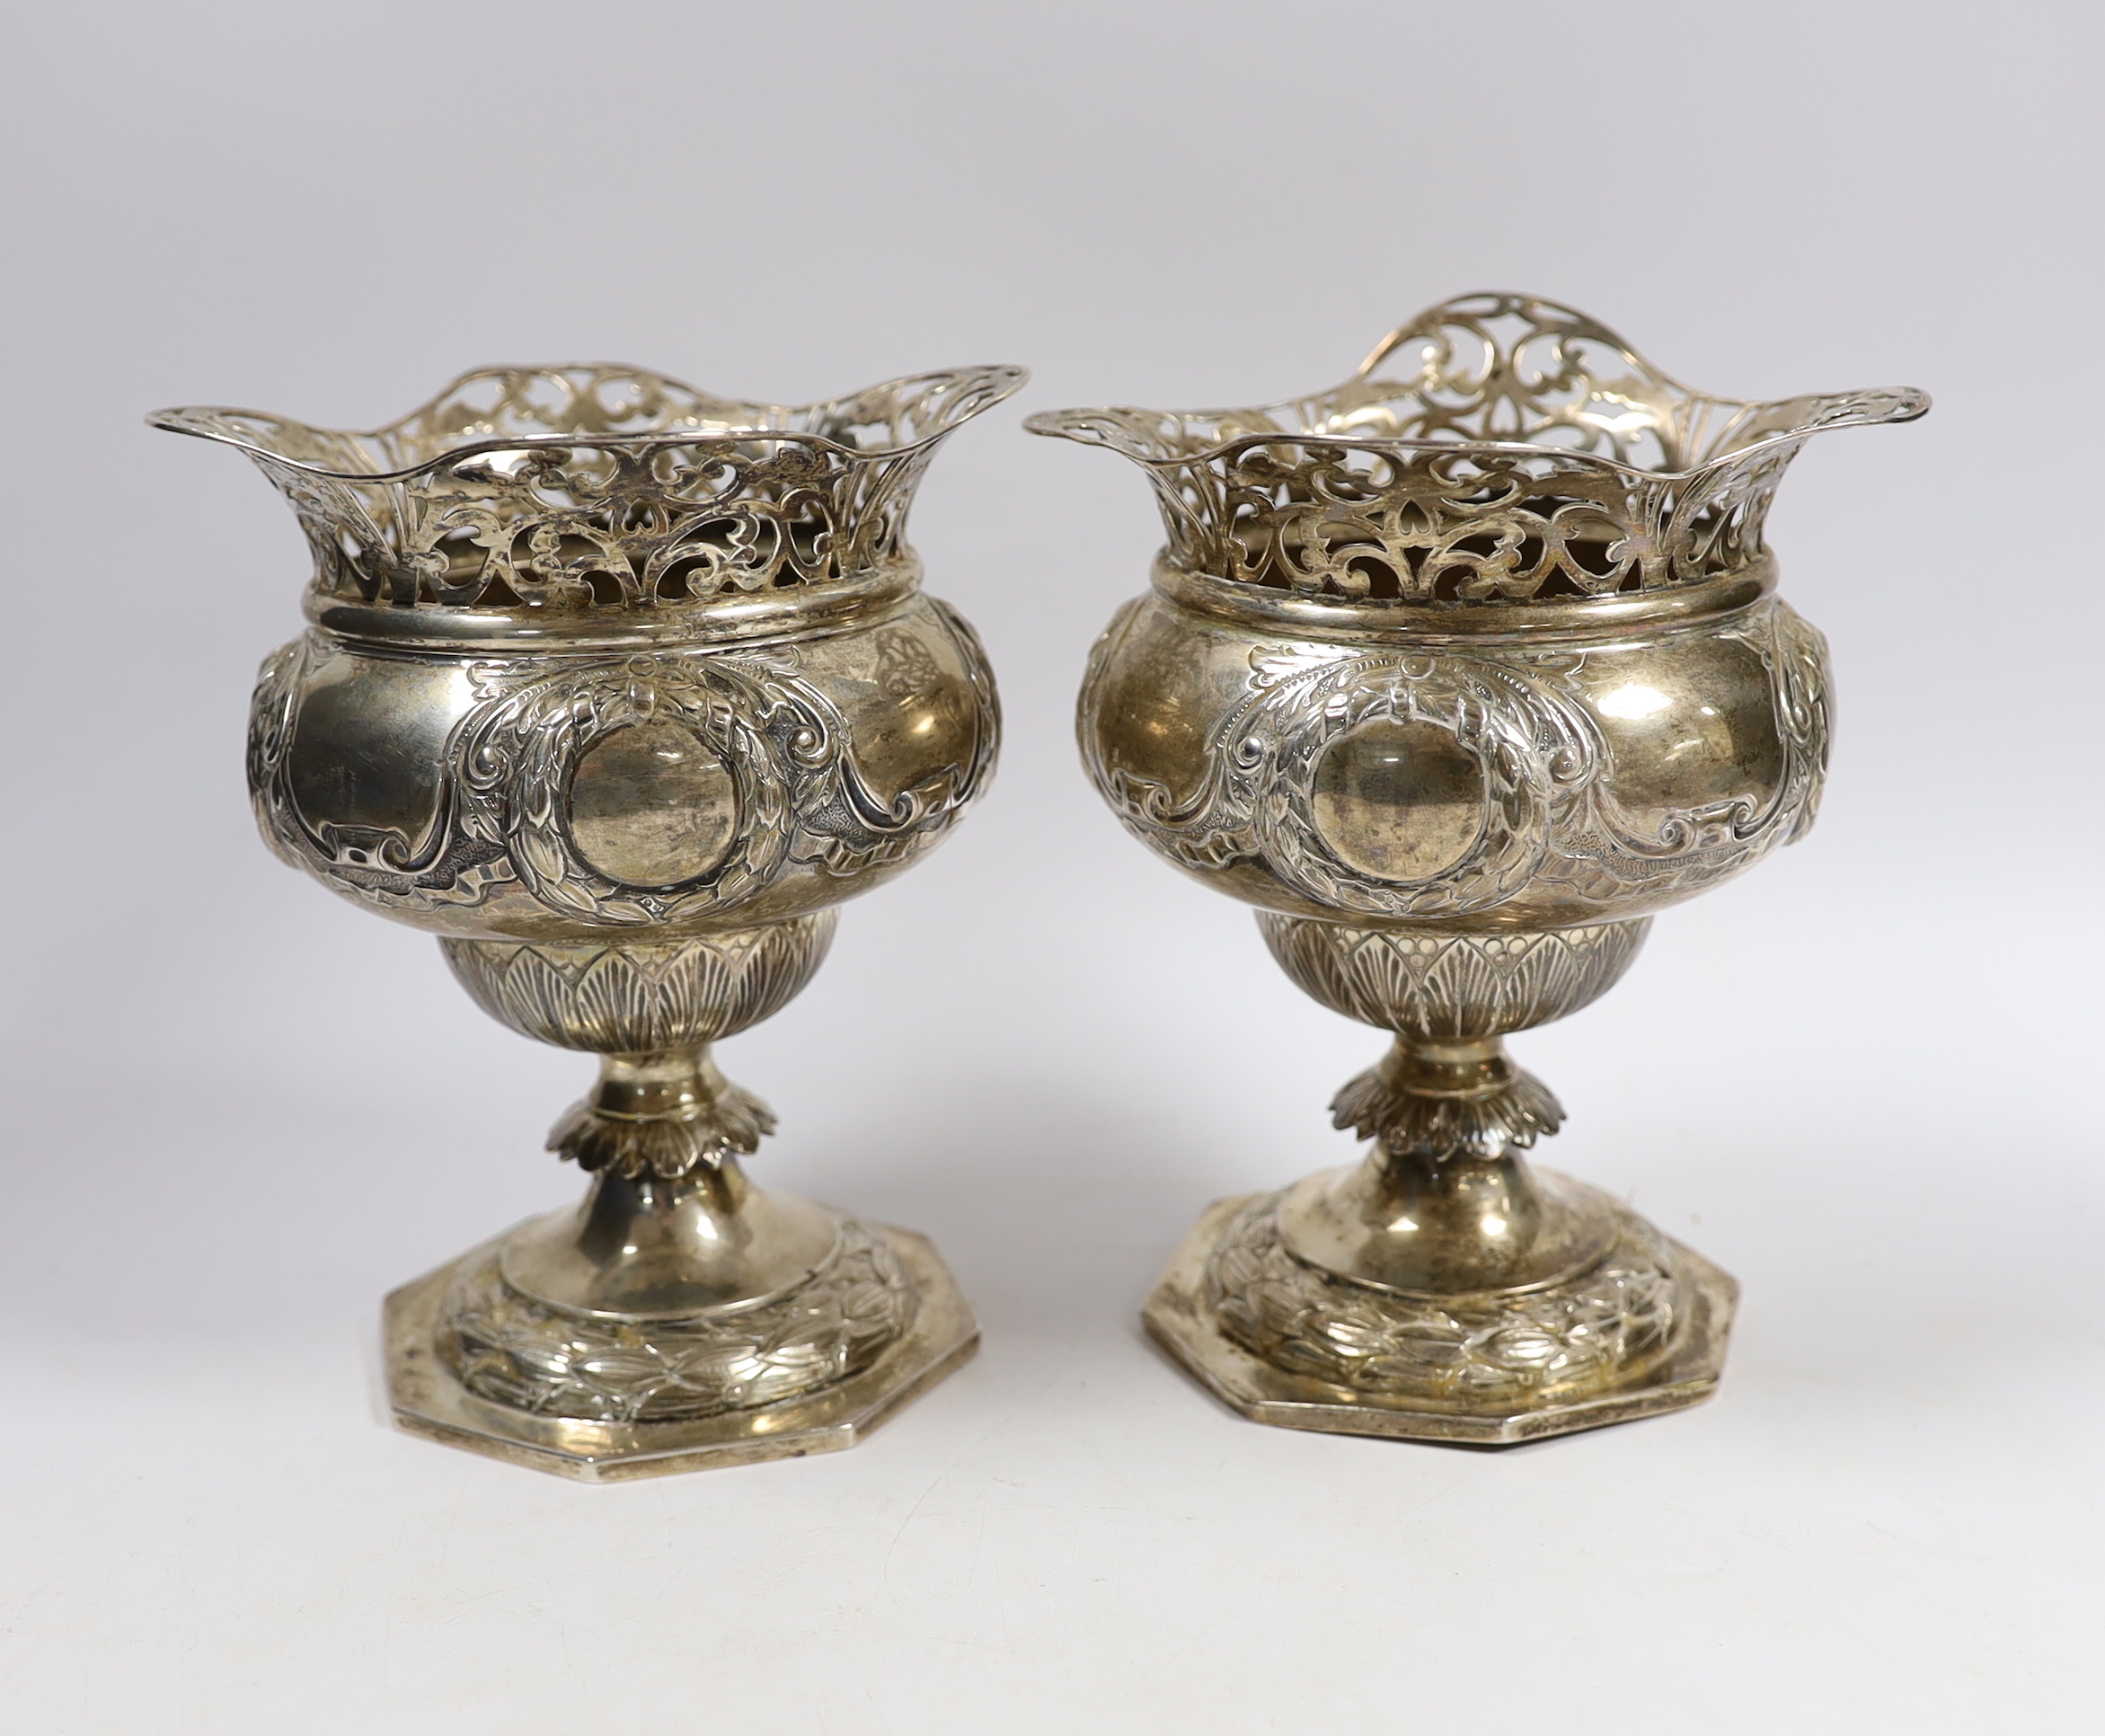 A pair of Edwardian silver pedestal vases, with pierced borders, Charles Edwards, London, 1903 height 15.8cm, 19.8oz.